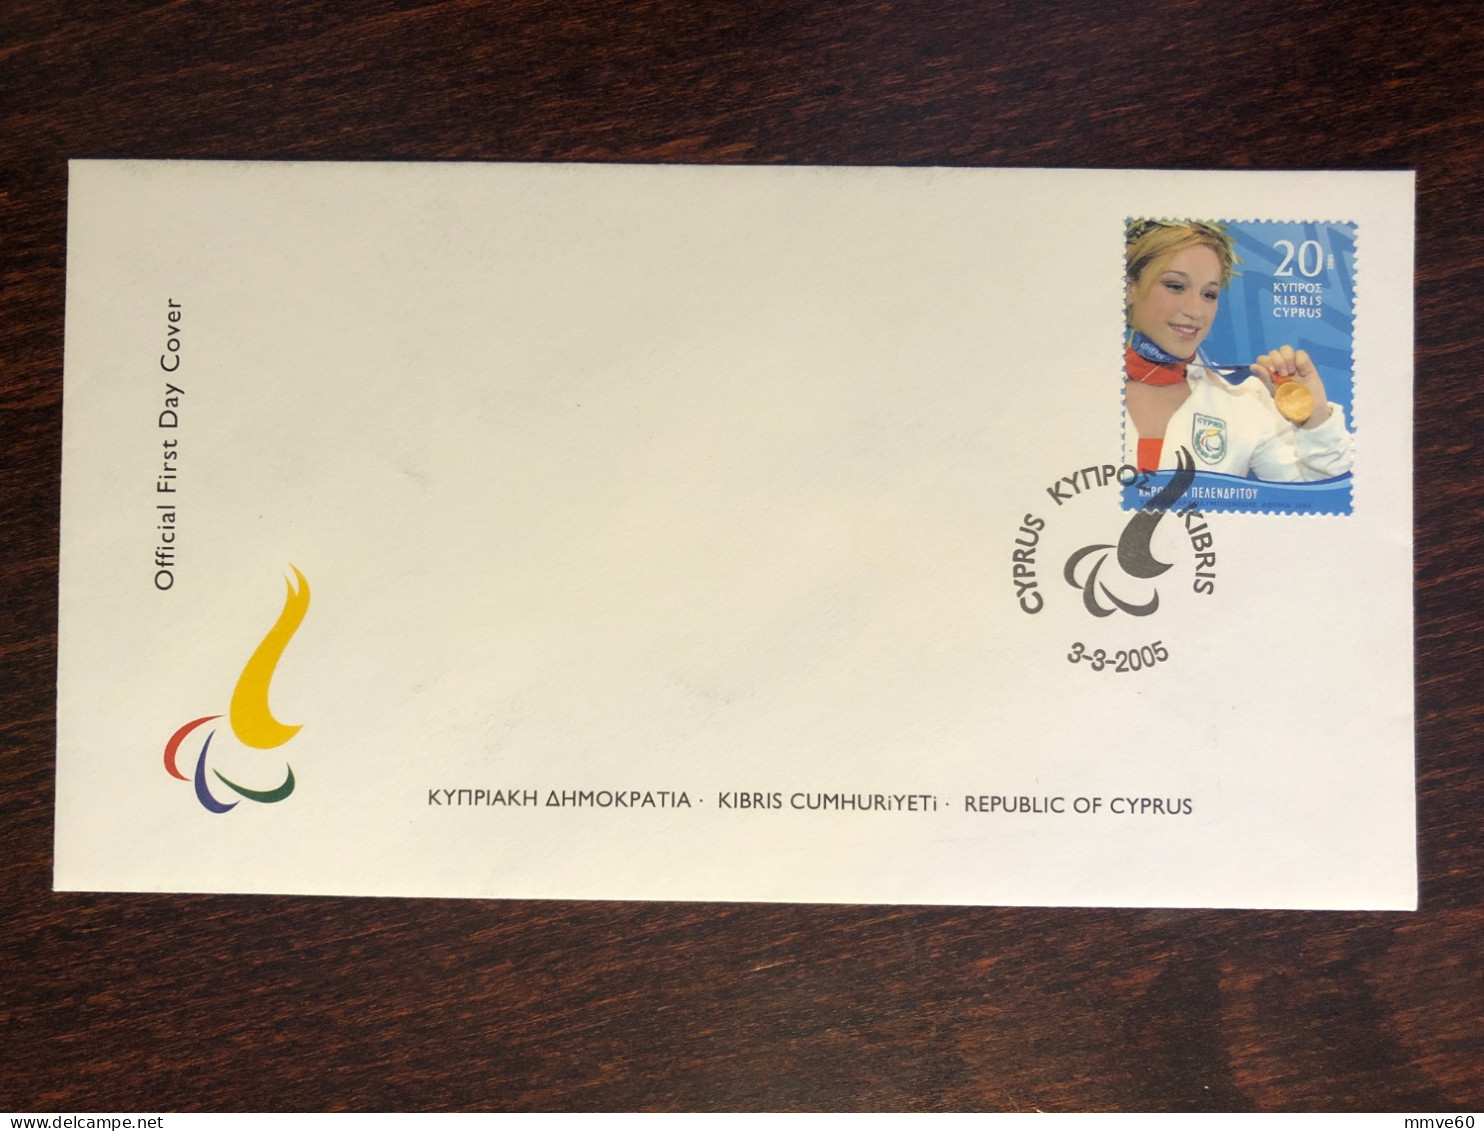 CYPRUS FDC COVER 2005 YEAR PARALYMPIC DISABLED SPORTS HEALTH MEDICINE STAMPS - Briefe U. Dokumente